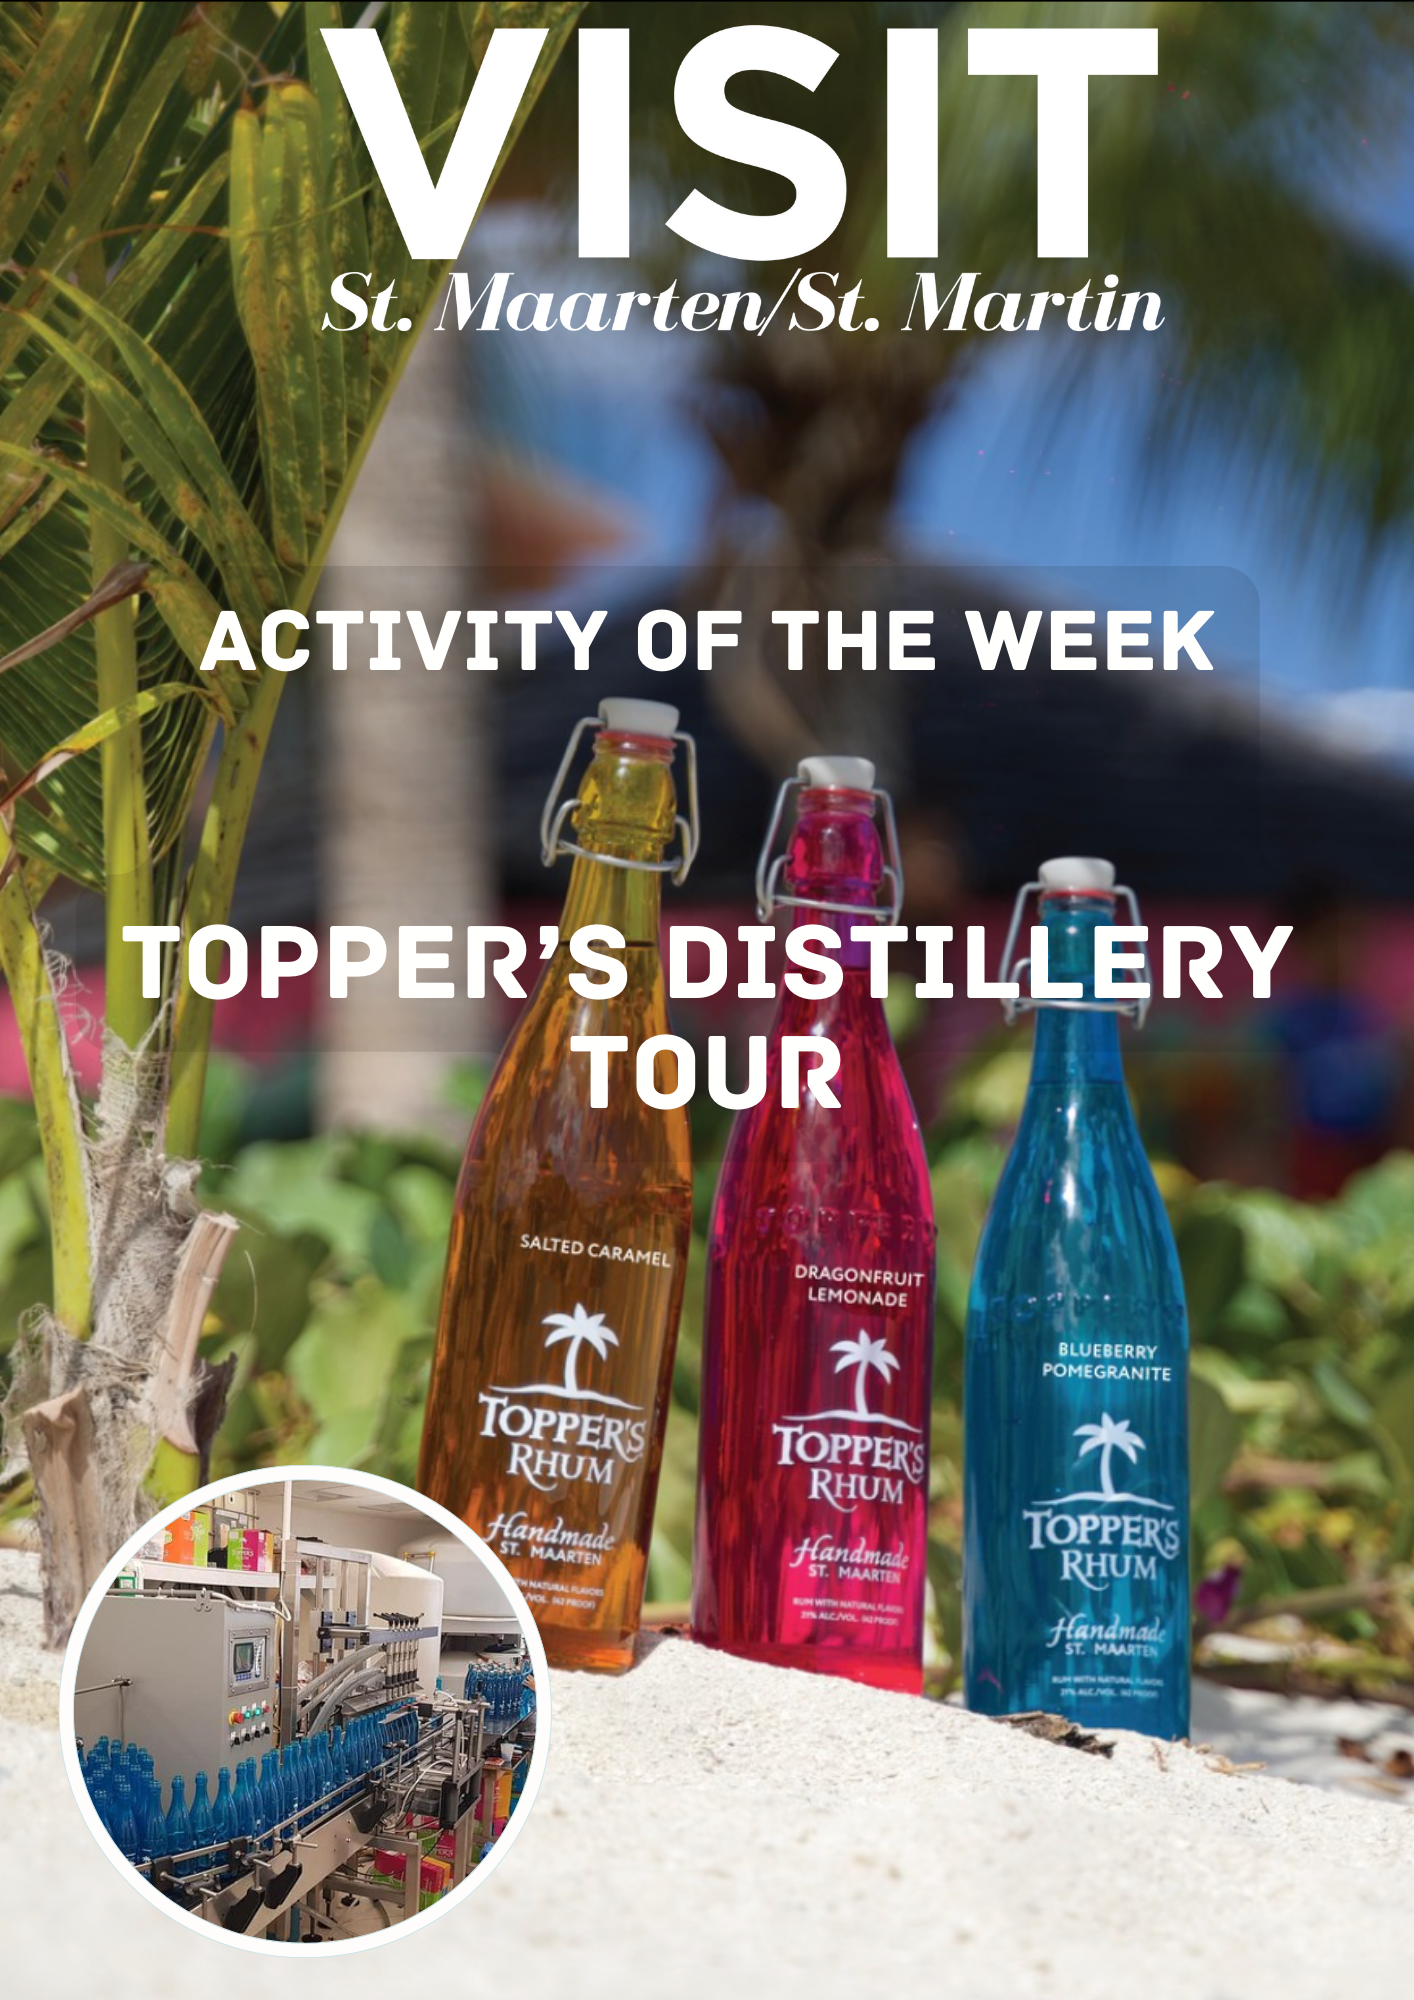 St Maarten activity of the week is the Topper's distillery tour at Simpson Bay where they make te official SXM rhum